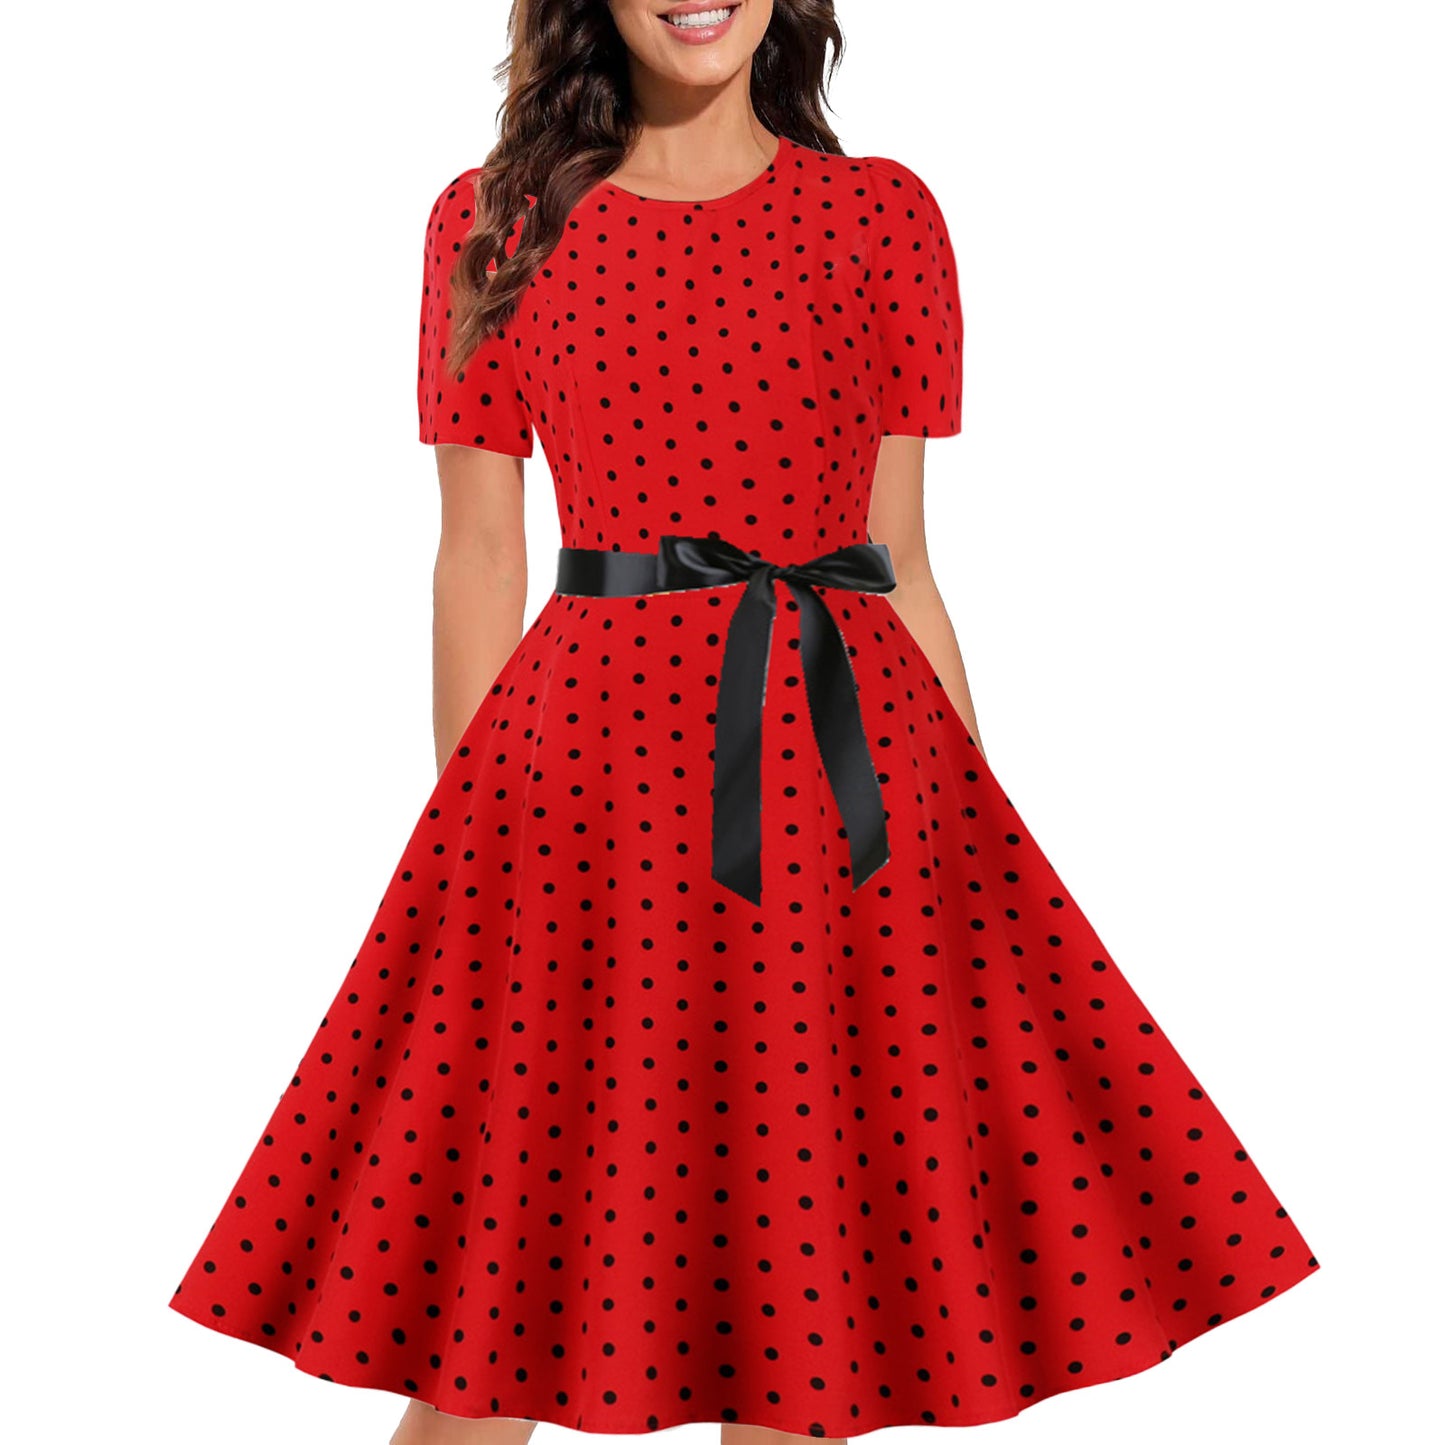 Women's Graceful and Fashionable Round Neck Slimming Polka Dot Floral Dress